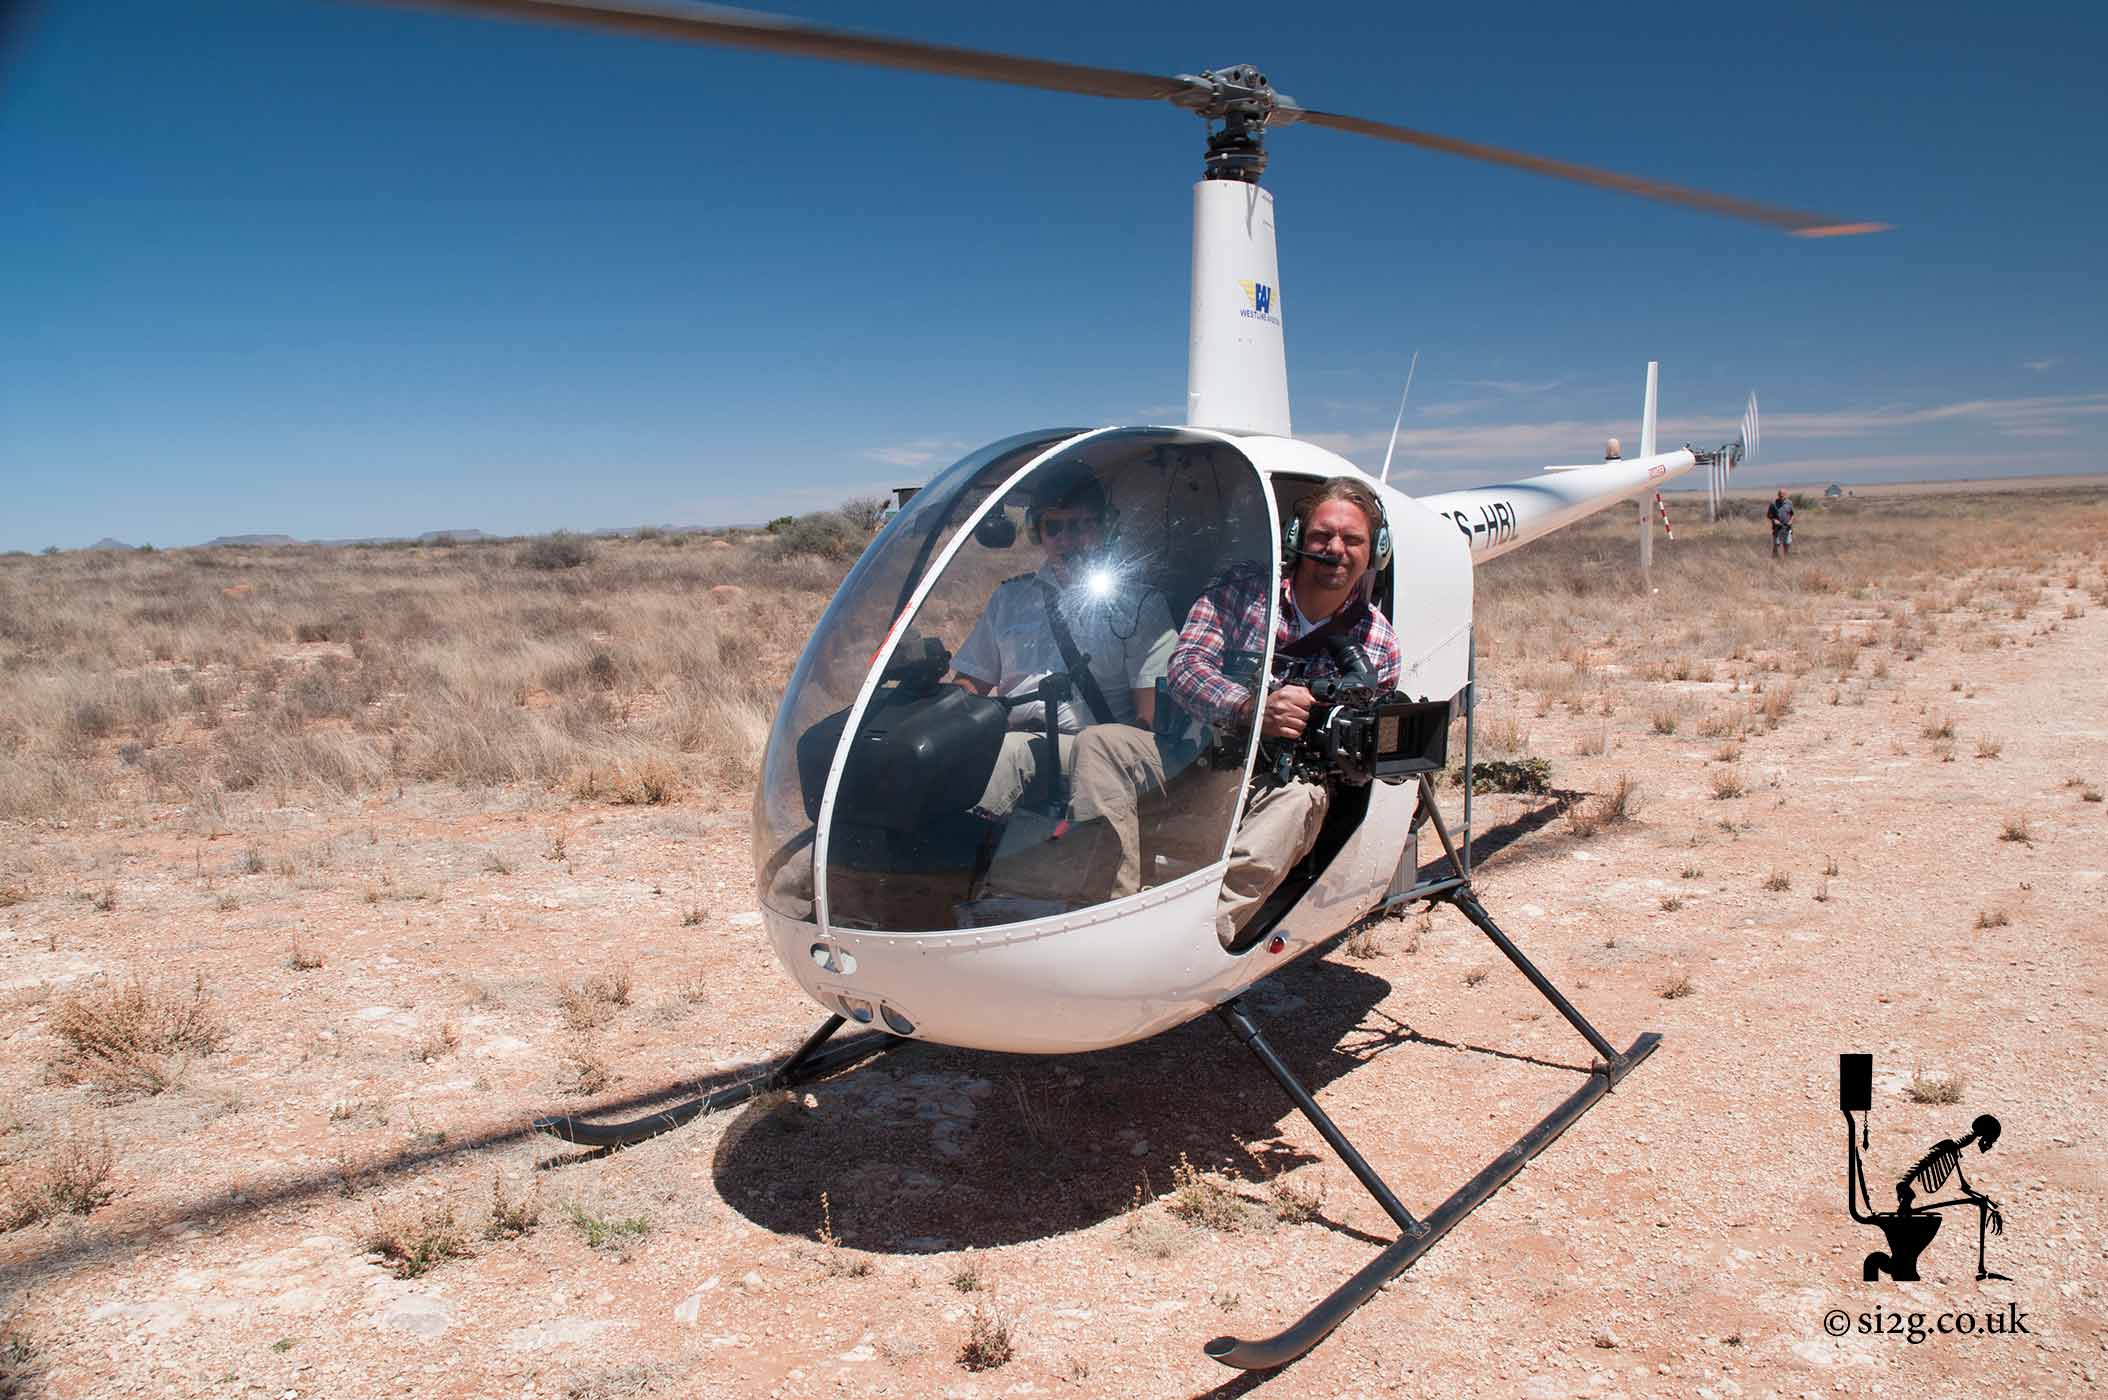 Aerial Filming - Aerial Filming the old-fashioned way.  With the door removed the Robinson Helicopter is an extremely exciting way to film South Africa and its wildlife.  We were able to get fairly smooth tracking shots of a 4x4 driving across rough desert.  The pilot used to round up cattle on a farm using a helicopter and proceeded to demonstrate this out over the desert.  Of course, today you